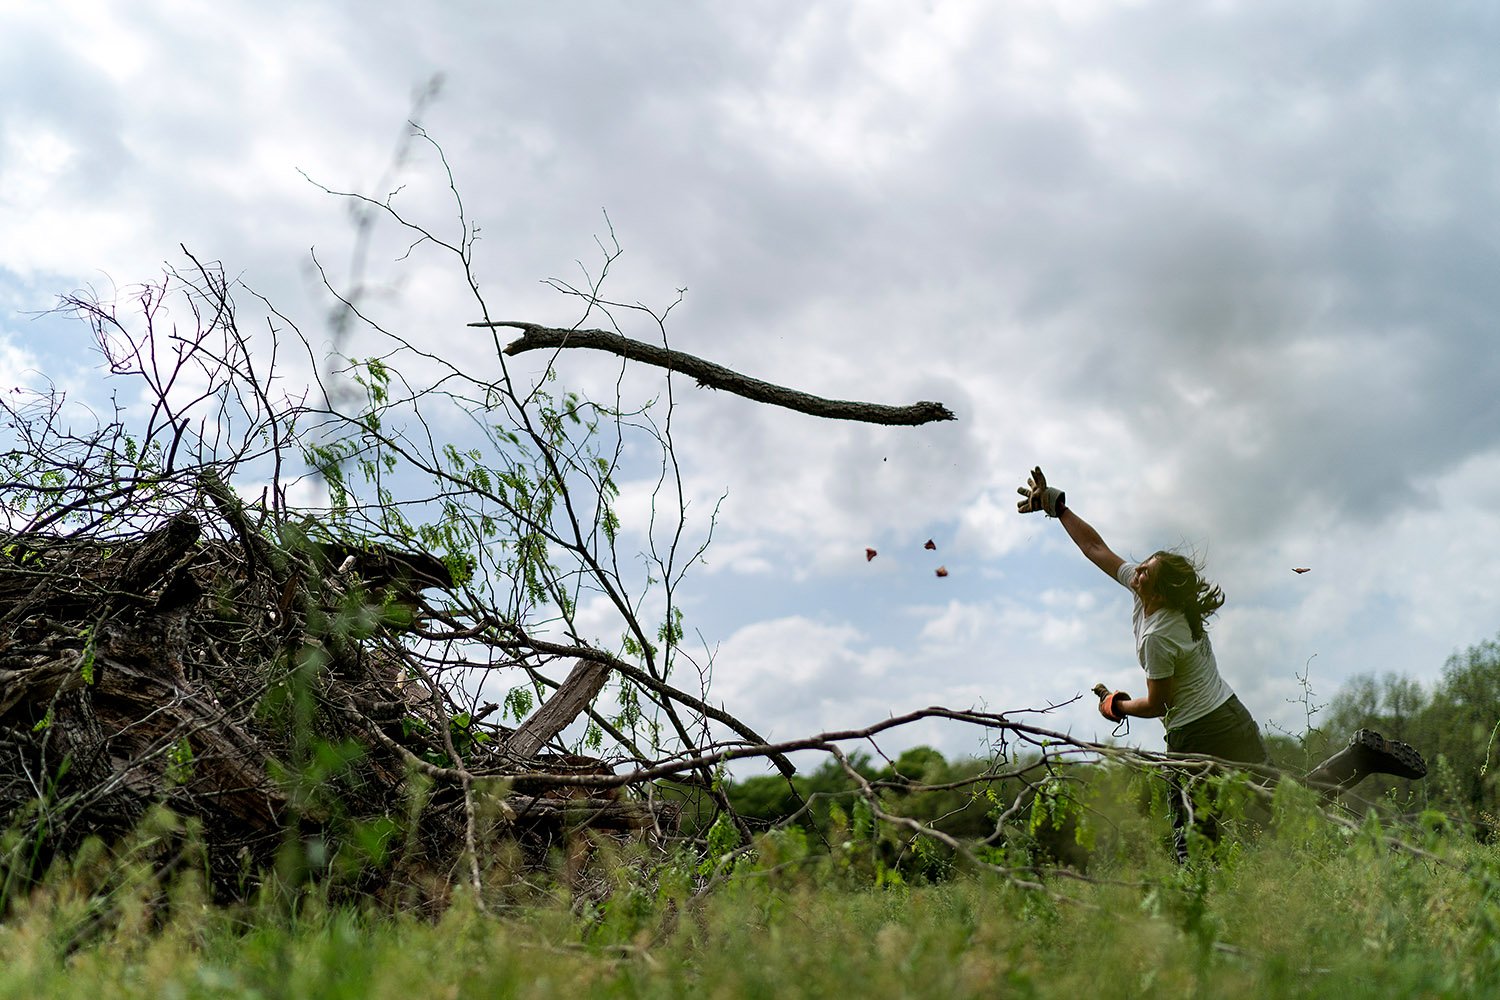  Meredith Ellis clears a field of branches so her cattle have more space to graze on her ranch in Rosston, Texas, Wednesday, April 19, 2023. (AP Photo/David Goldman)  